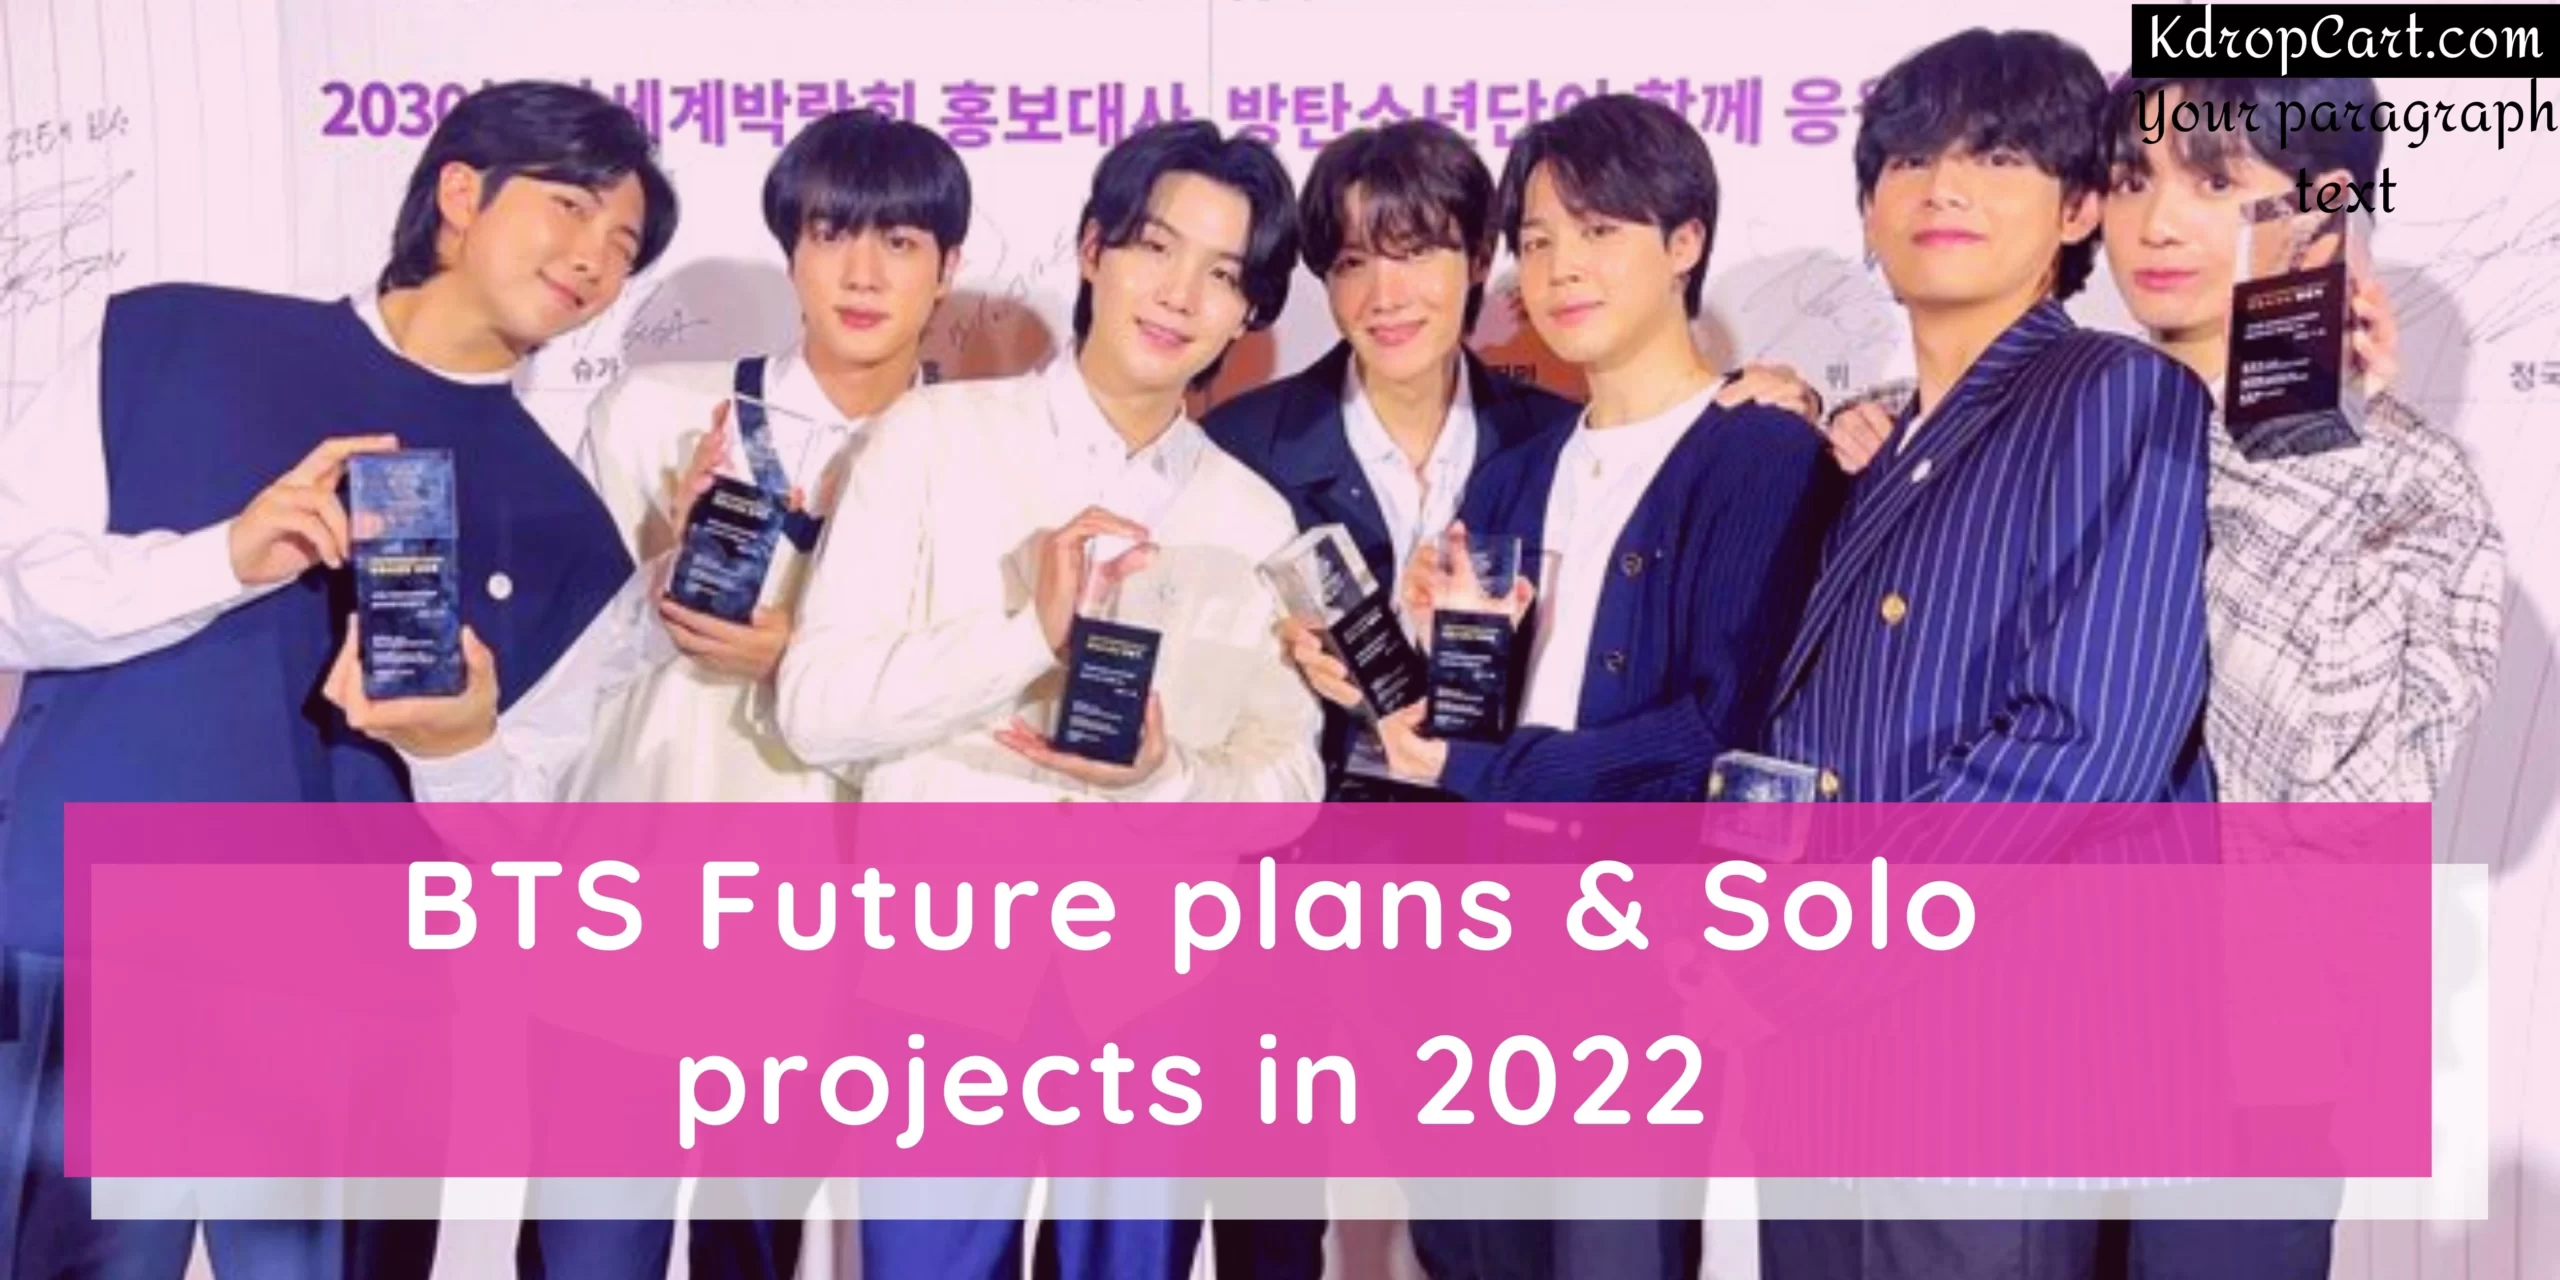 bts solo plans and future projects